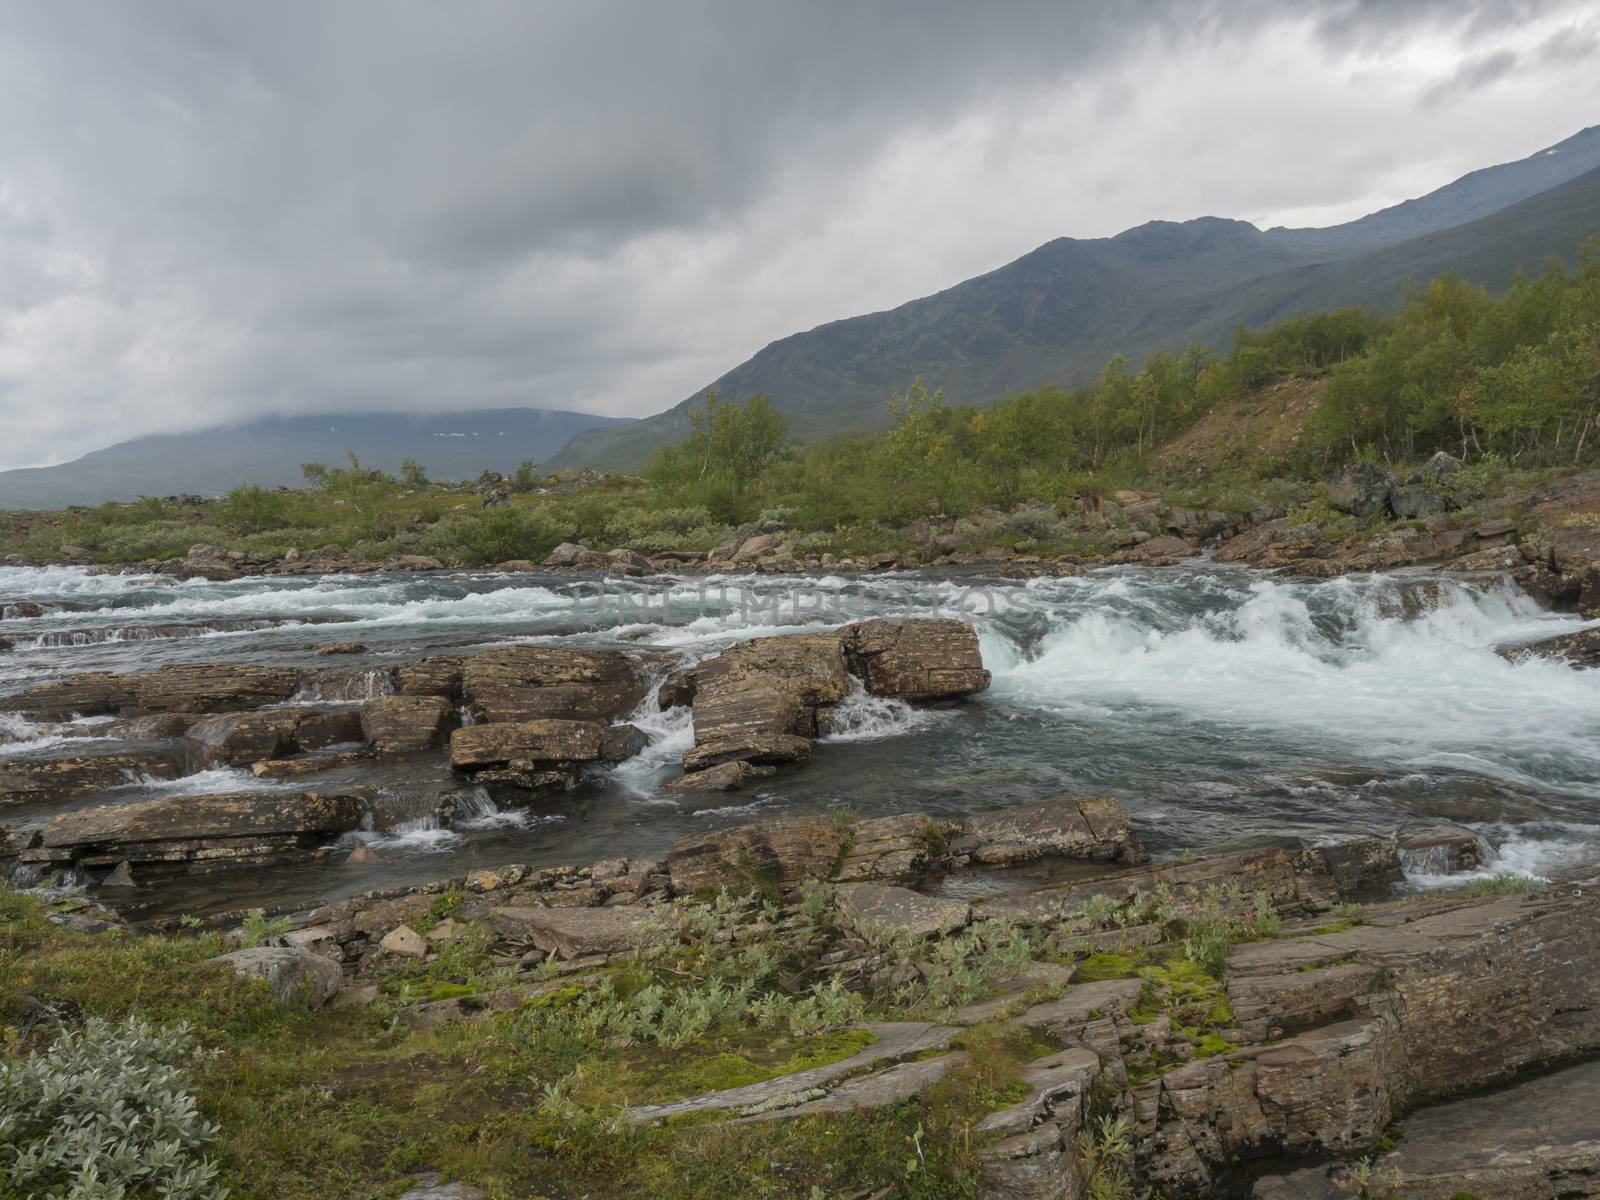 Wild Tjaktjajakka river with waterfall cascade, birch tree forest and mountains. Lapland nature landscape in summer, moody sky